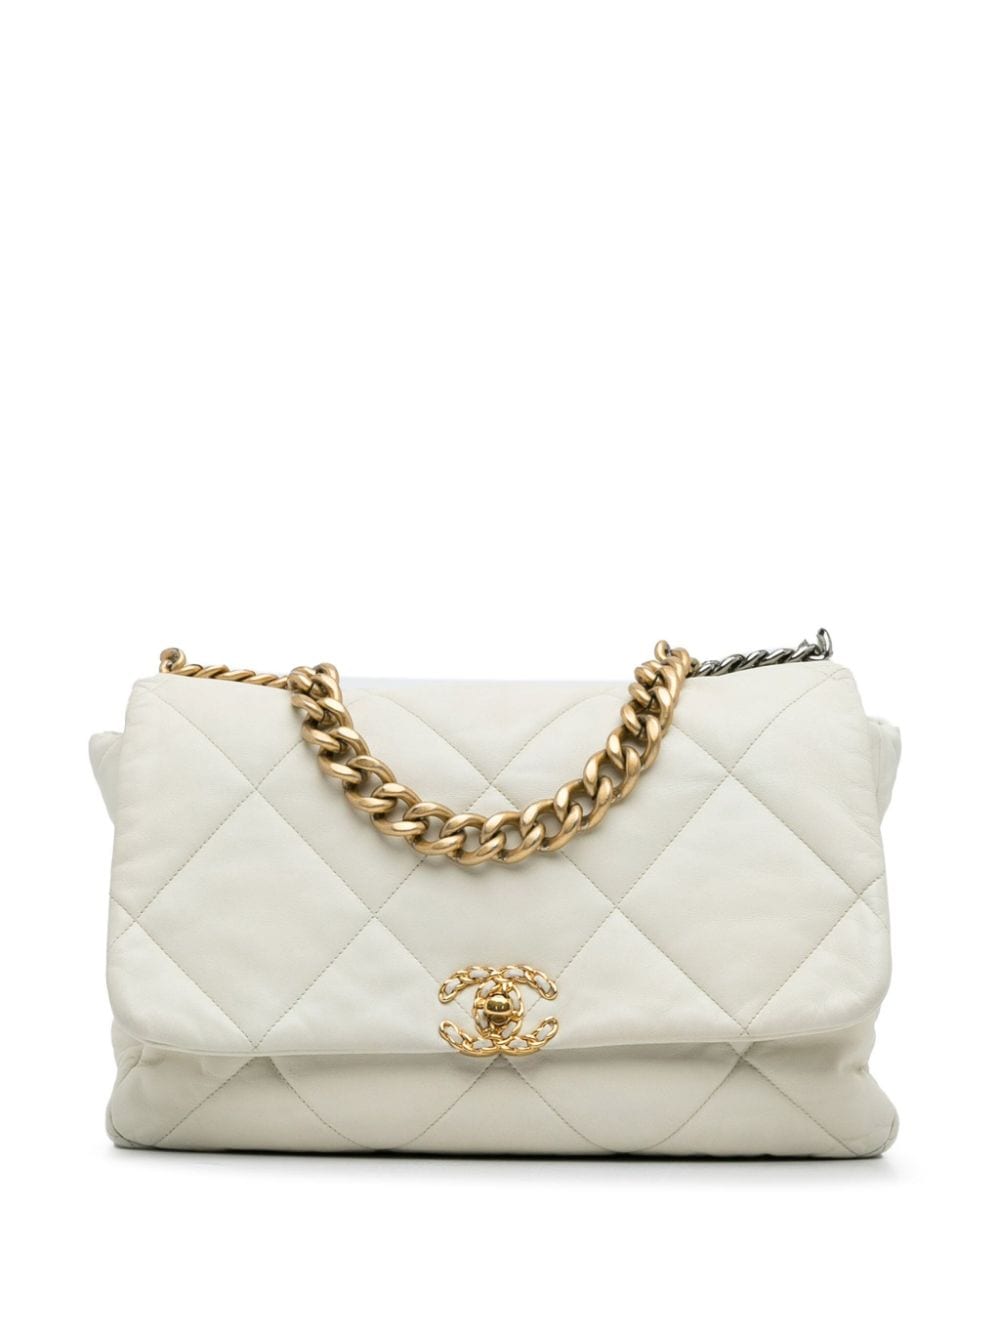 Pre-owned Chanel 2019 Maxi Lambskin 19 Flap Satchel In White